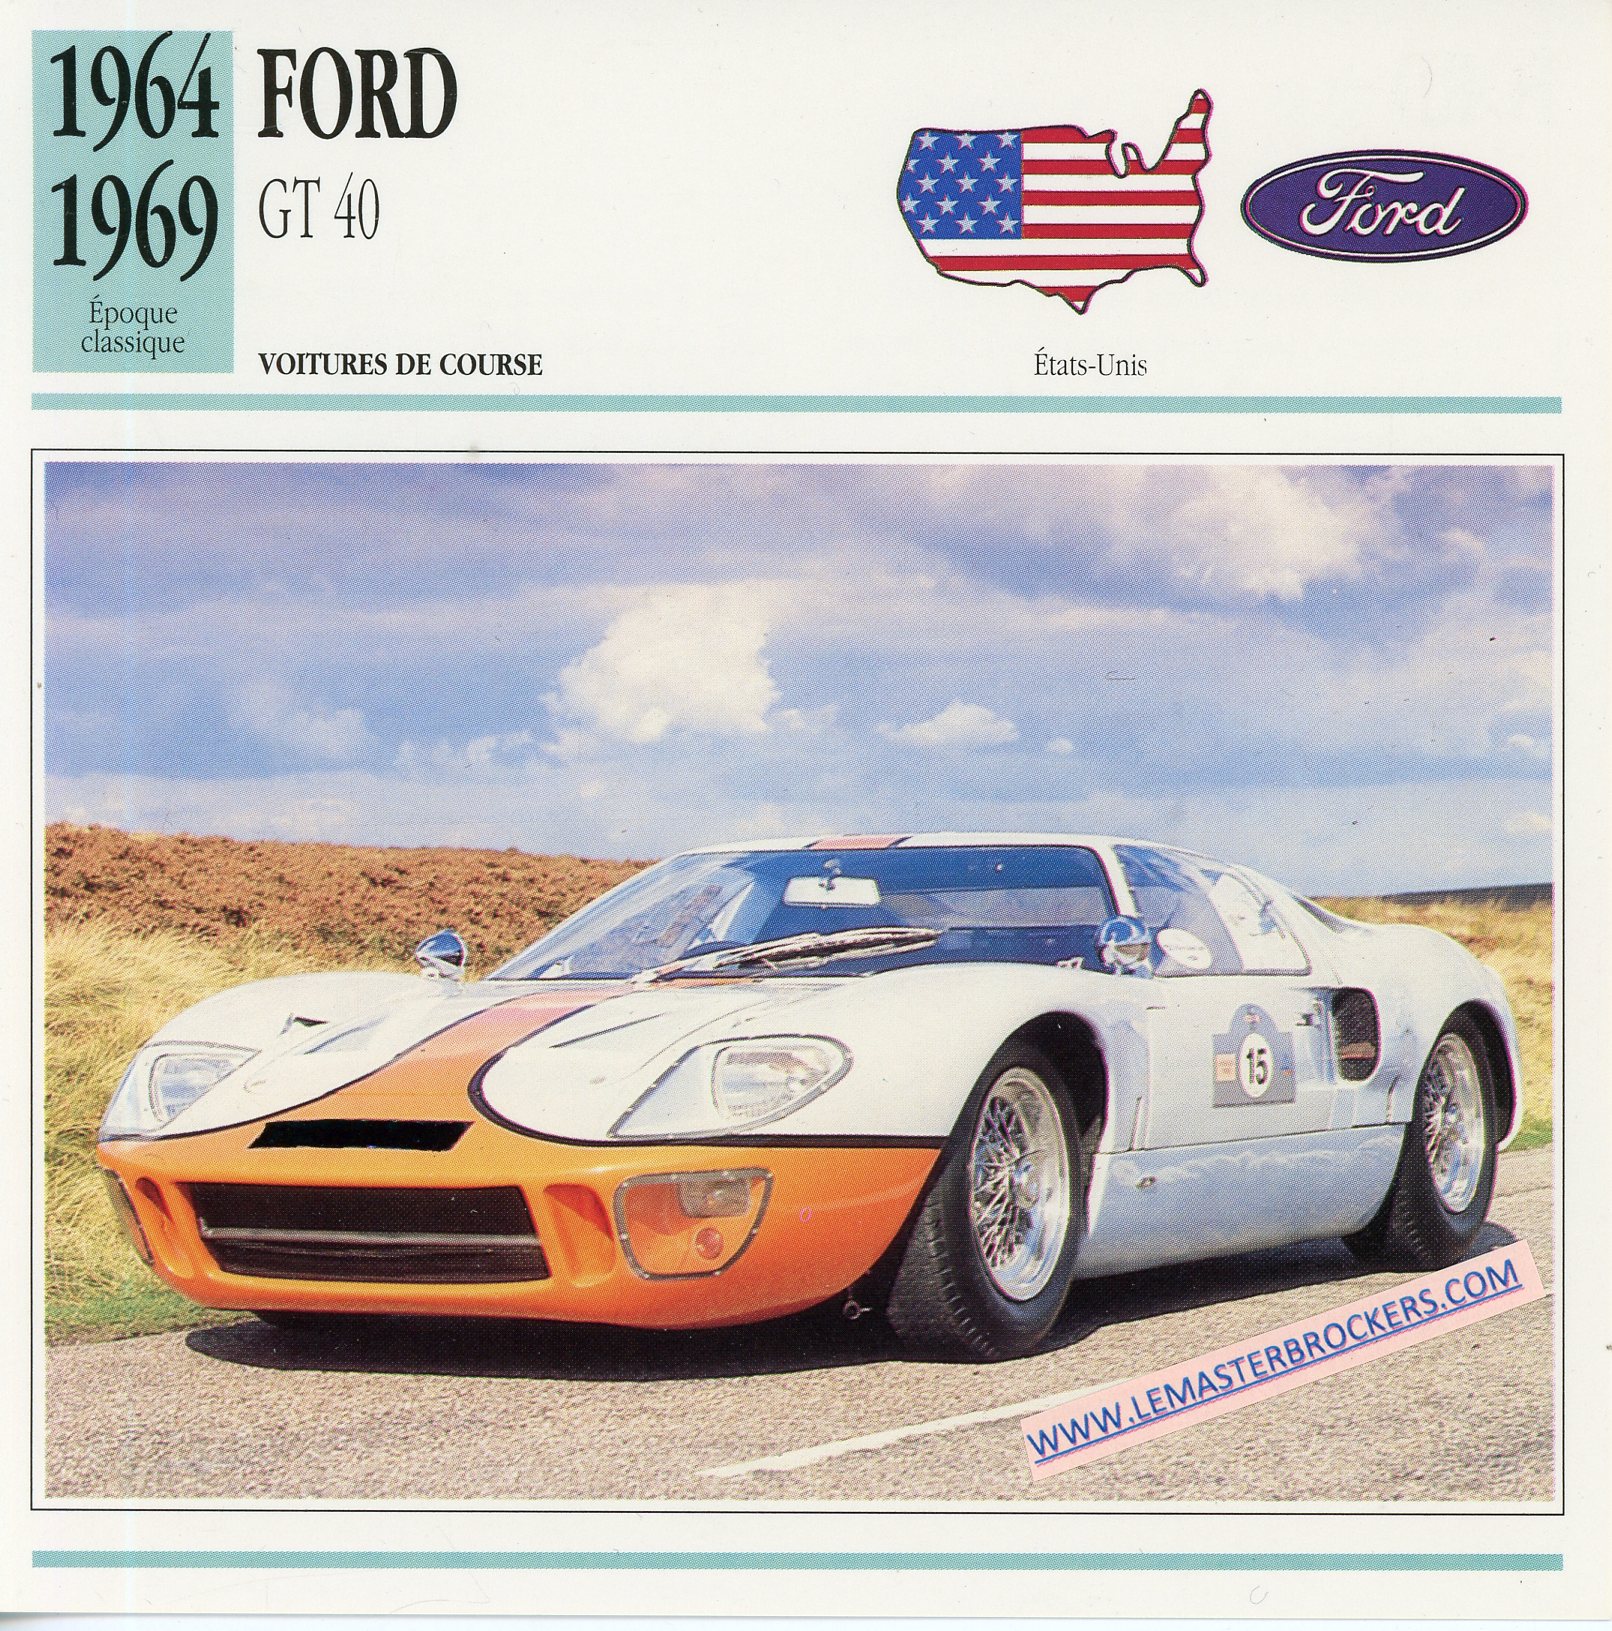 FICHE-AUTO-FORD-GT-40-GT40-1963-1969-LEMASTERBROCKERS